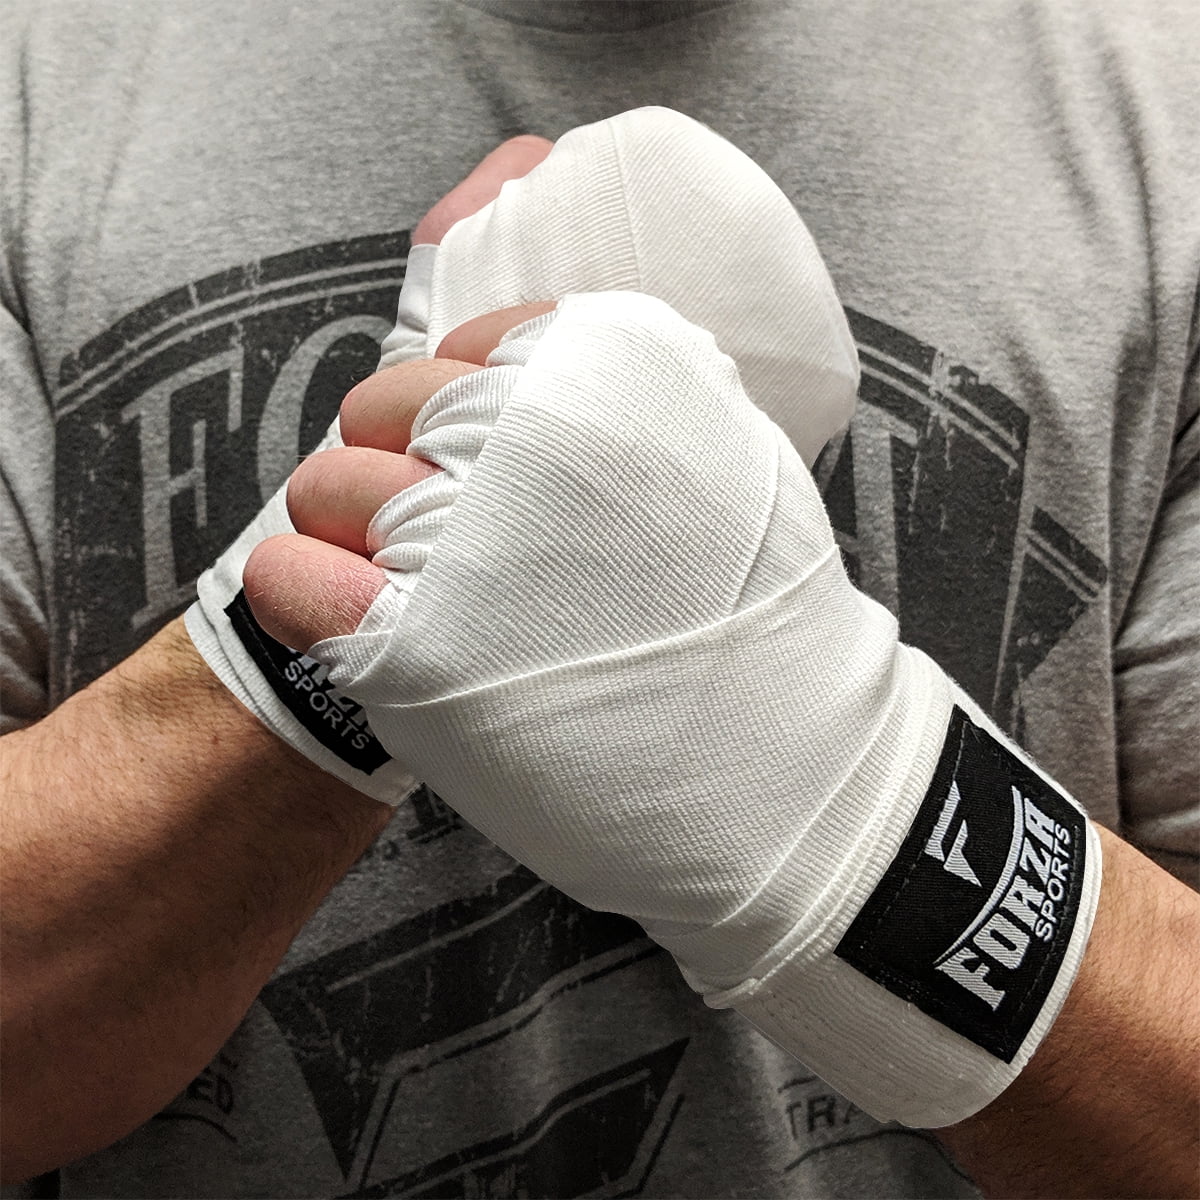 Boxing Hand Wraps Inner Strap Bandage 4.5m Maxican Stretch Fist Protector Gloves 